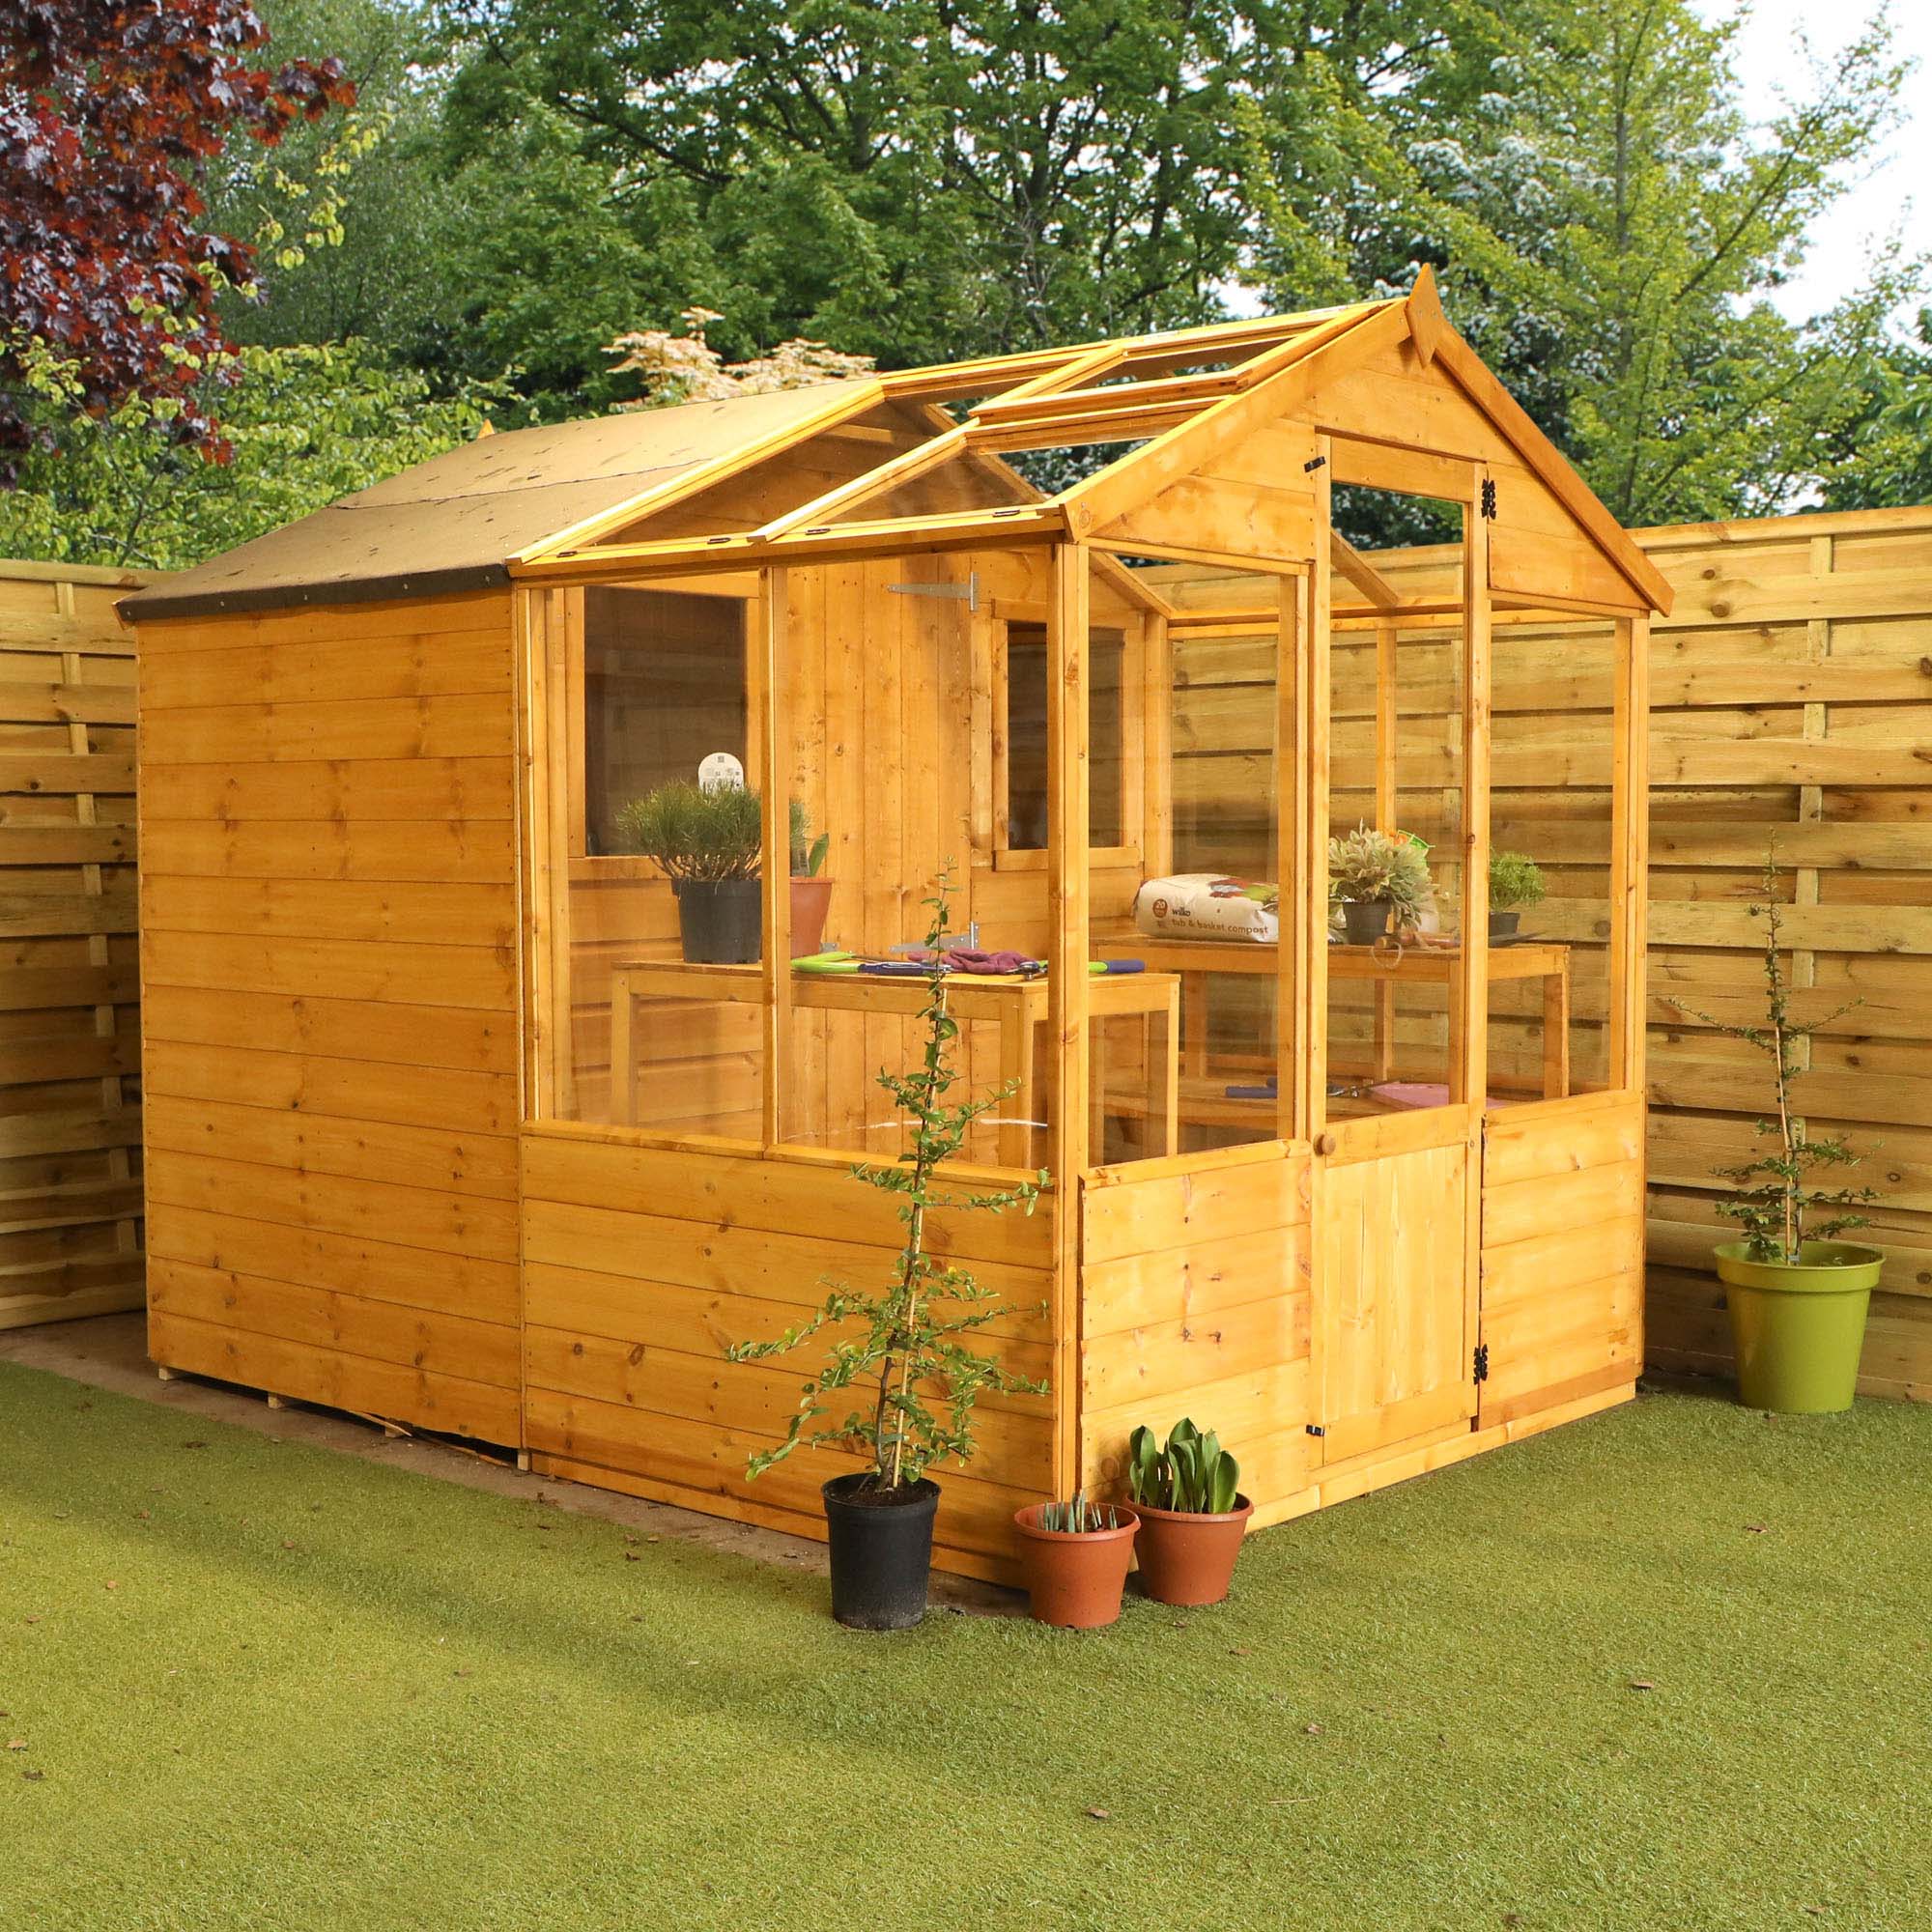 Wooden Greenhouse & Storage Shed 8x6 Outdoor Garden Building Potting